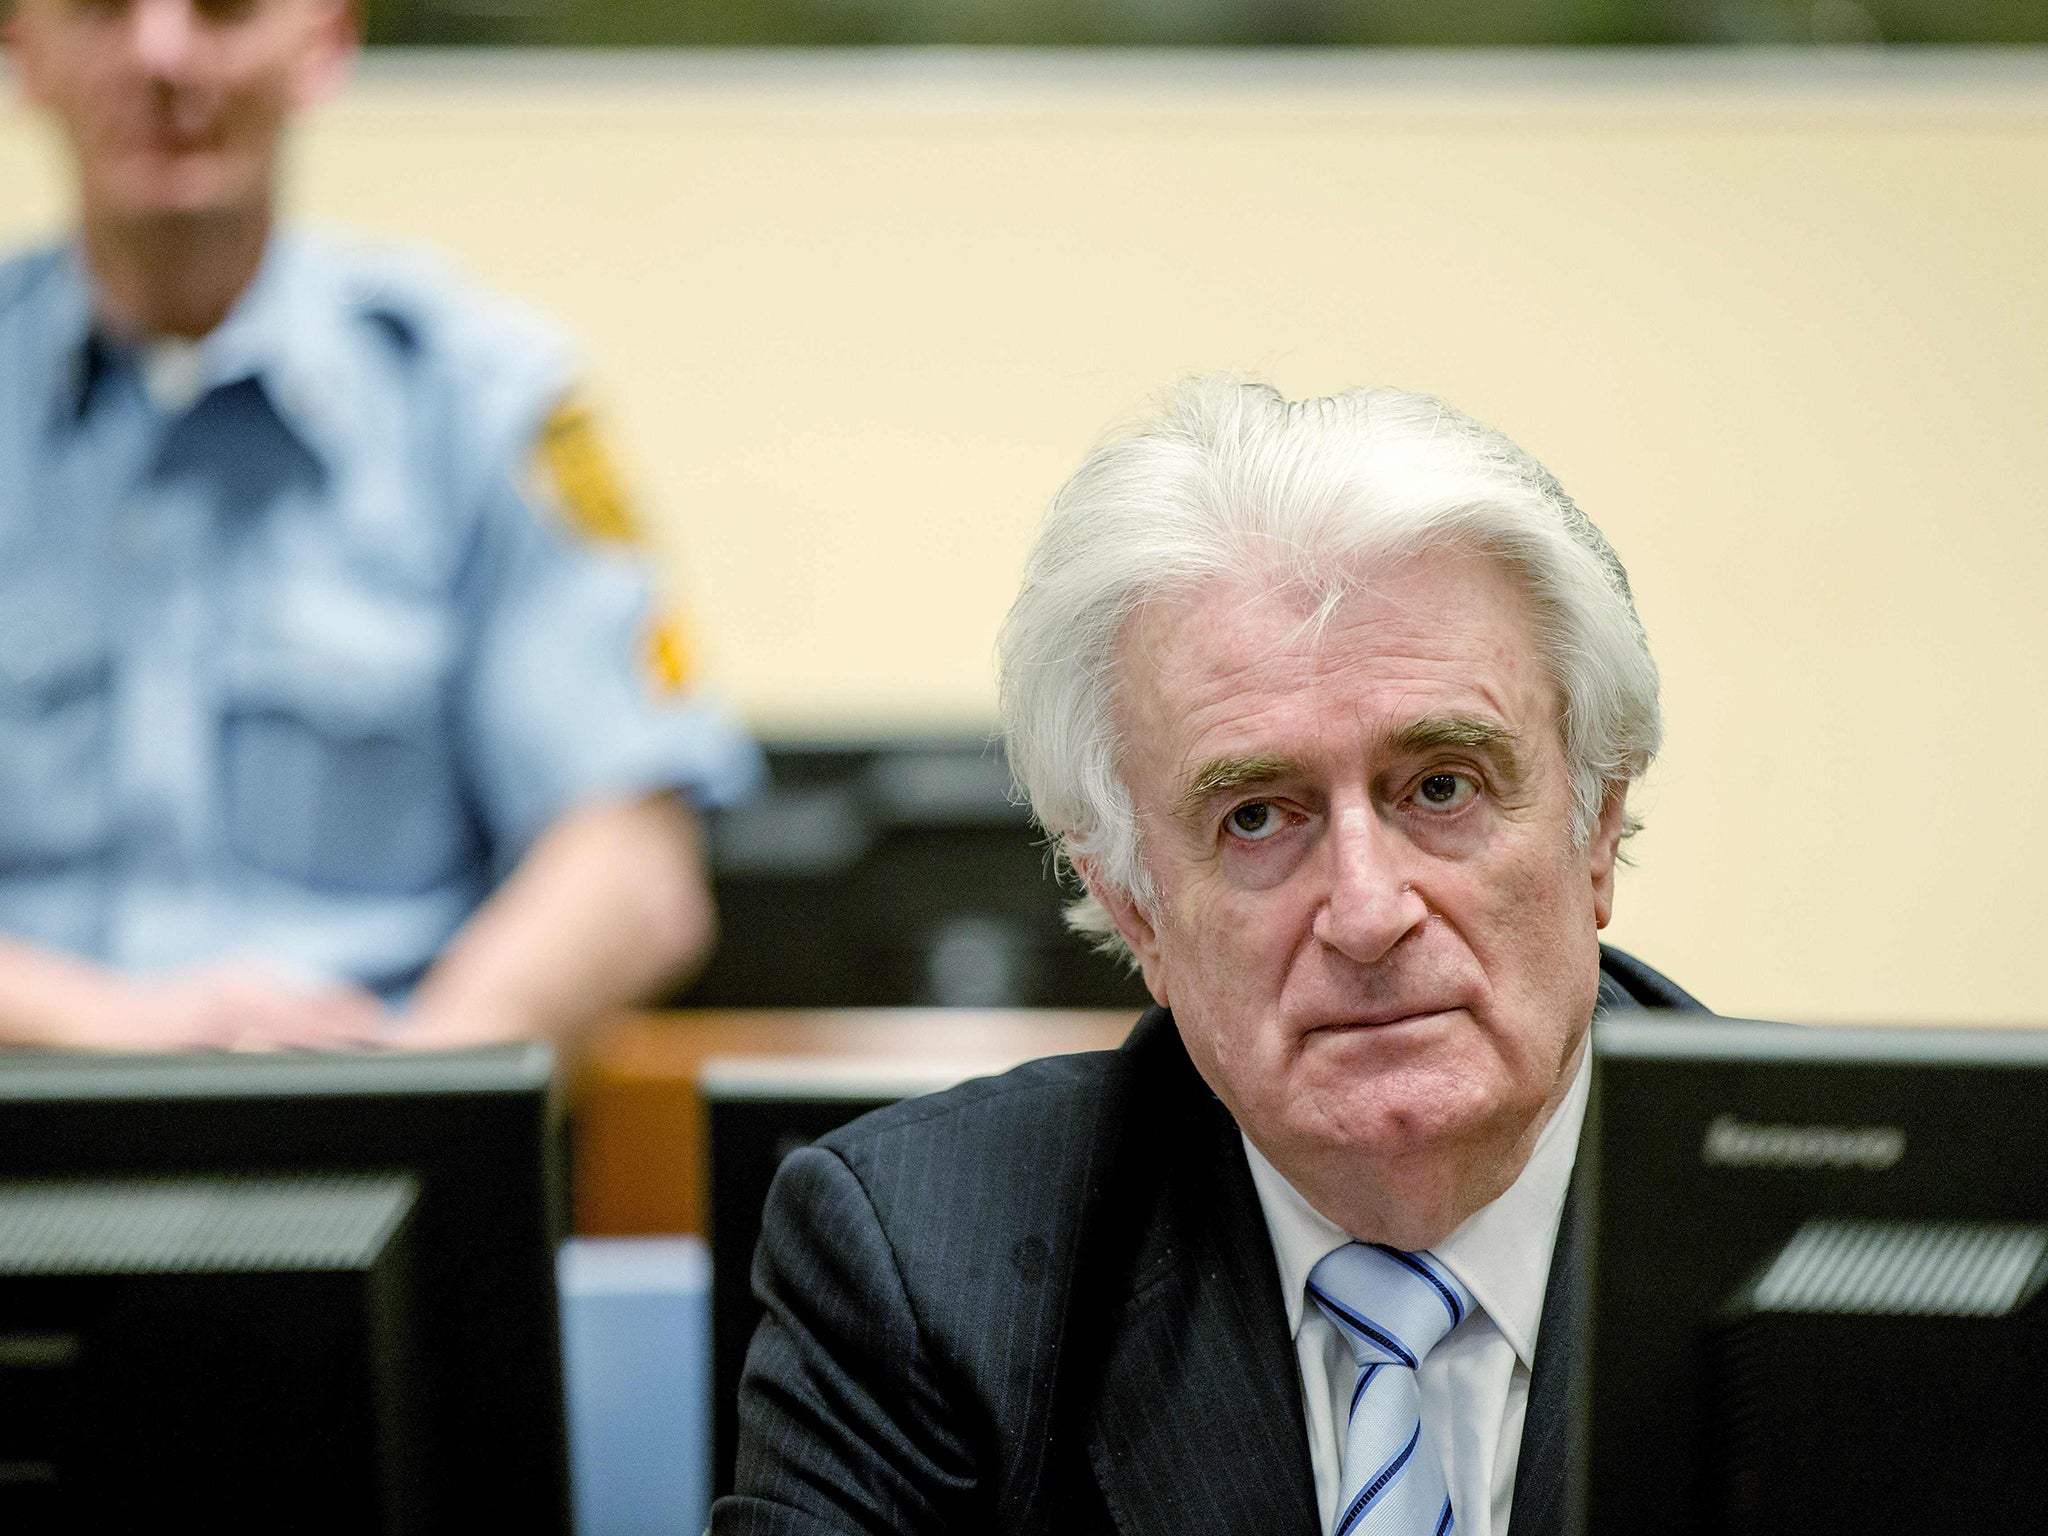 Bosnian Serb wartime leader Radovan Karadzic sits in the courtroom for the reading of his verdict at the International Criminal Tribunal for Former Yugoslavia